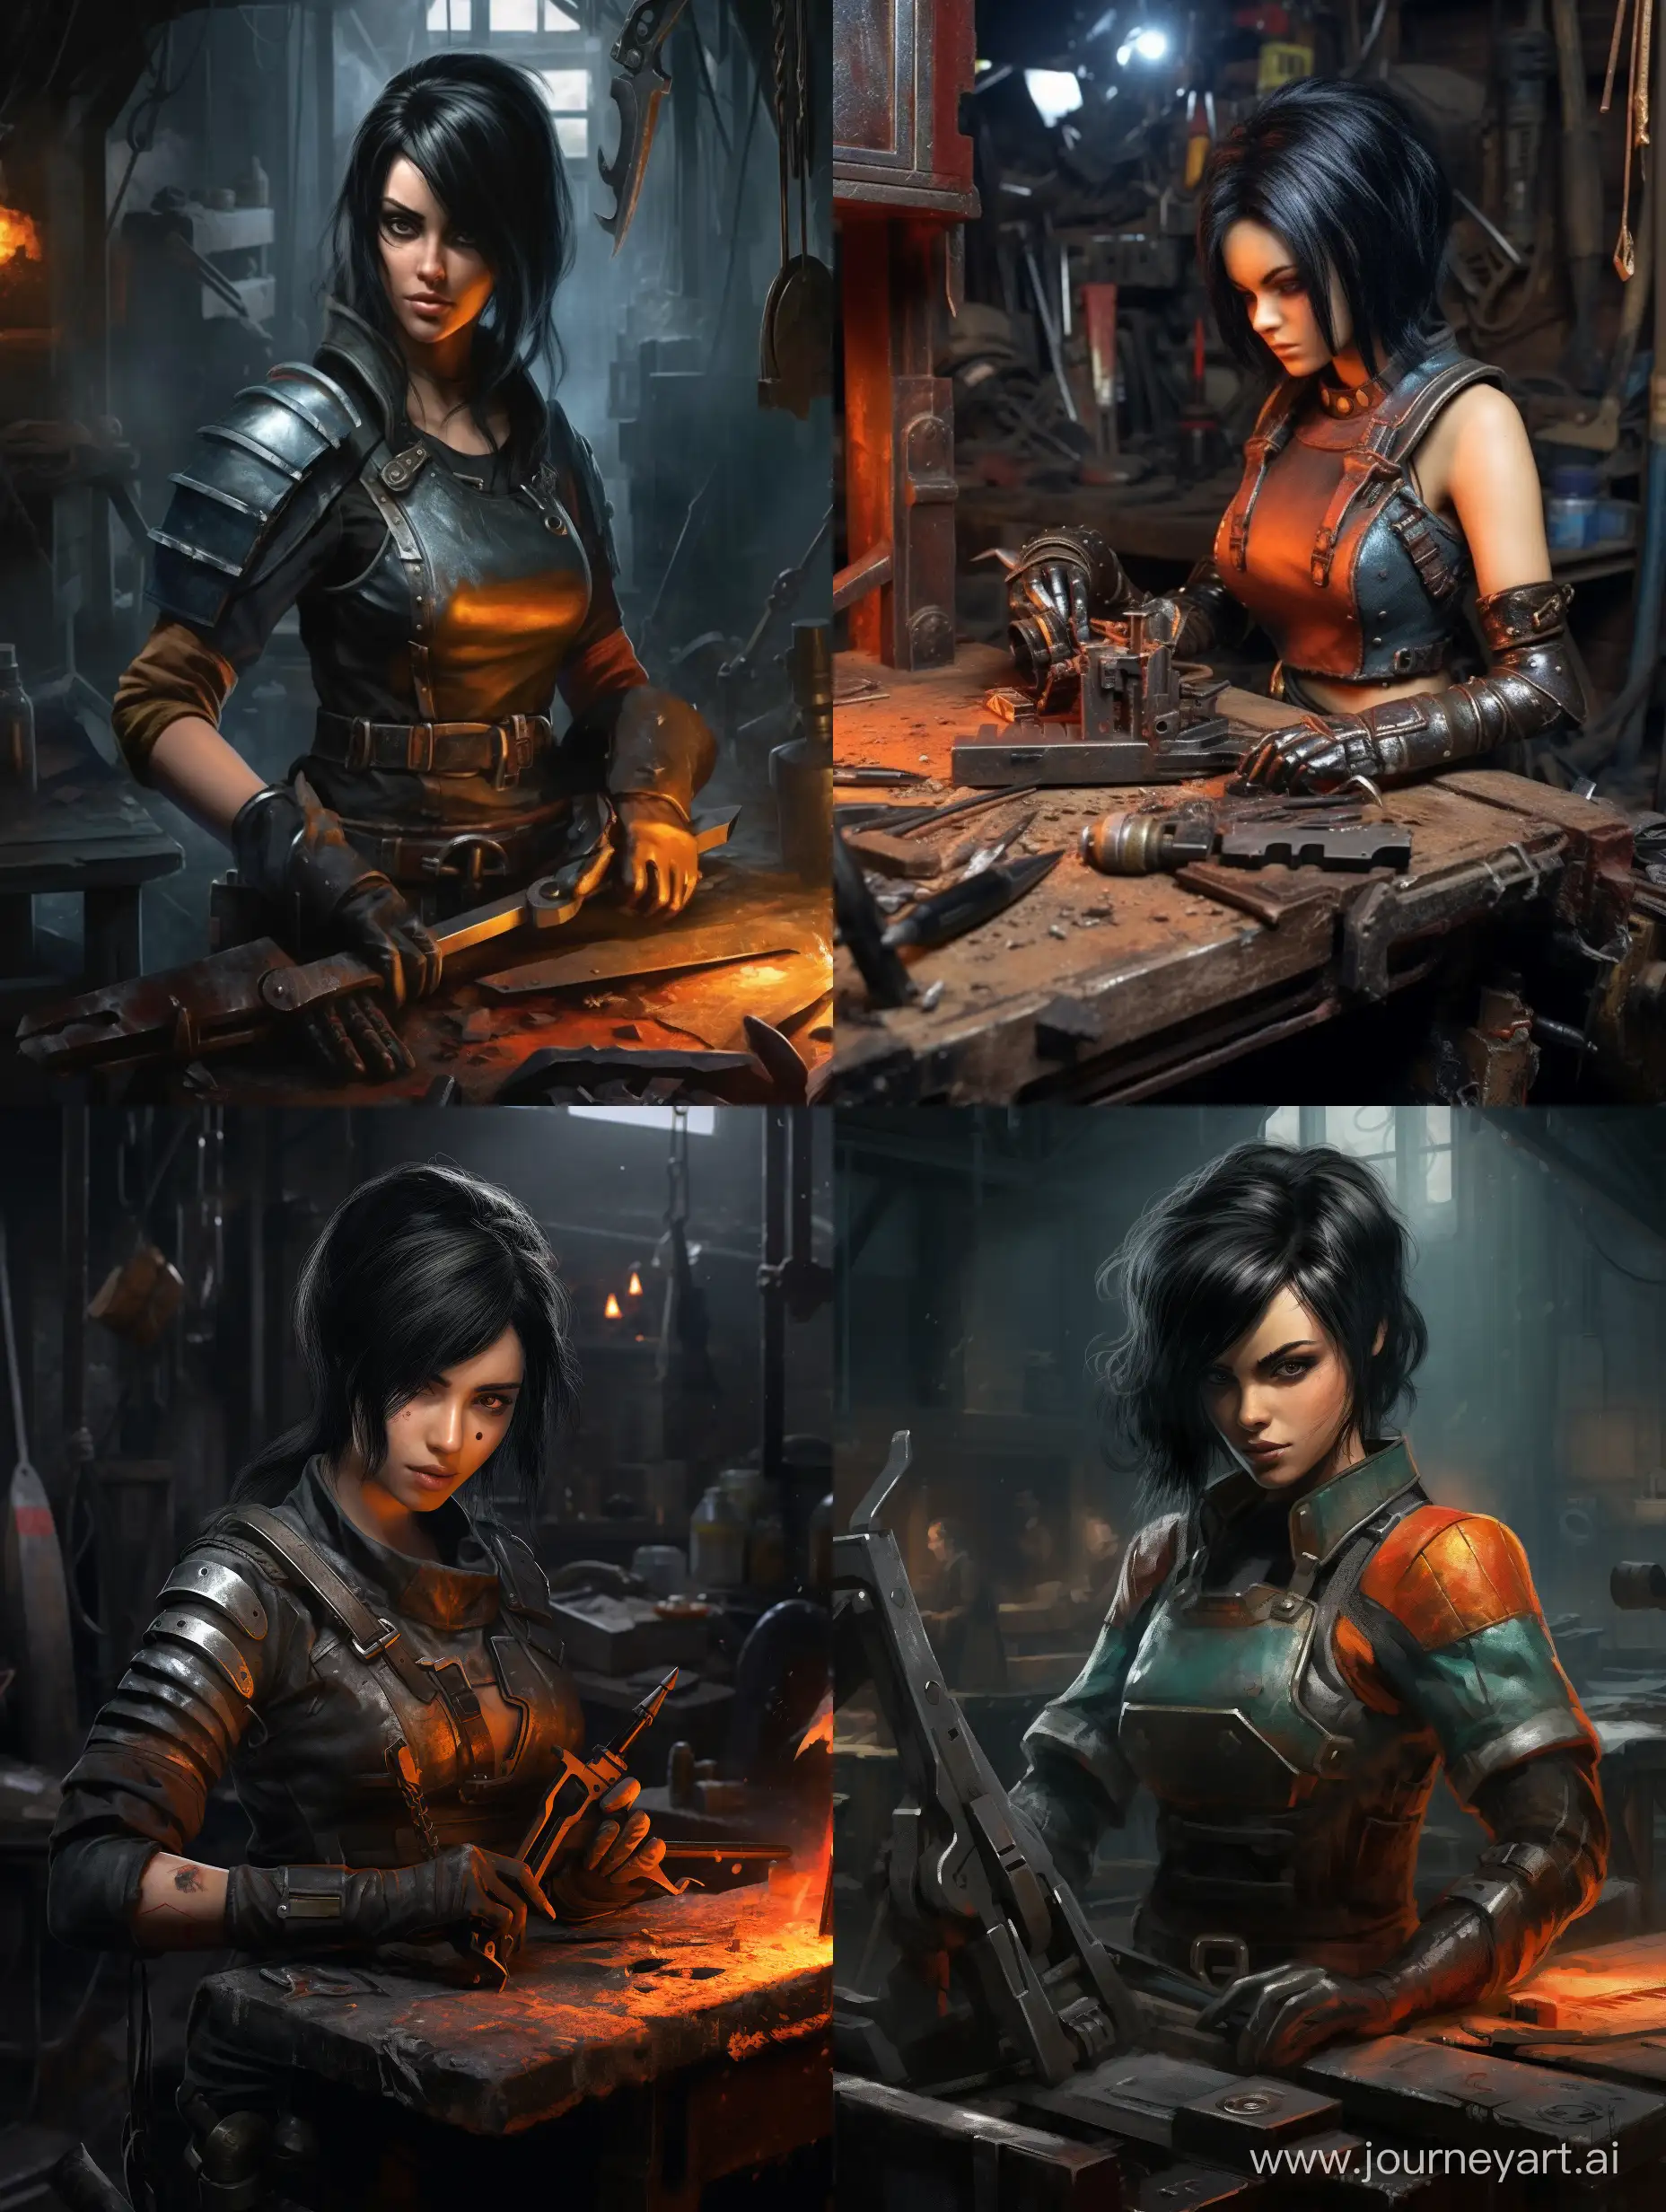 warhammer 40k, eldar girl with black hair, with carpenter's hammer in hands, with square logo on weapon, It looks like a photo Inside the forge